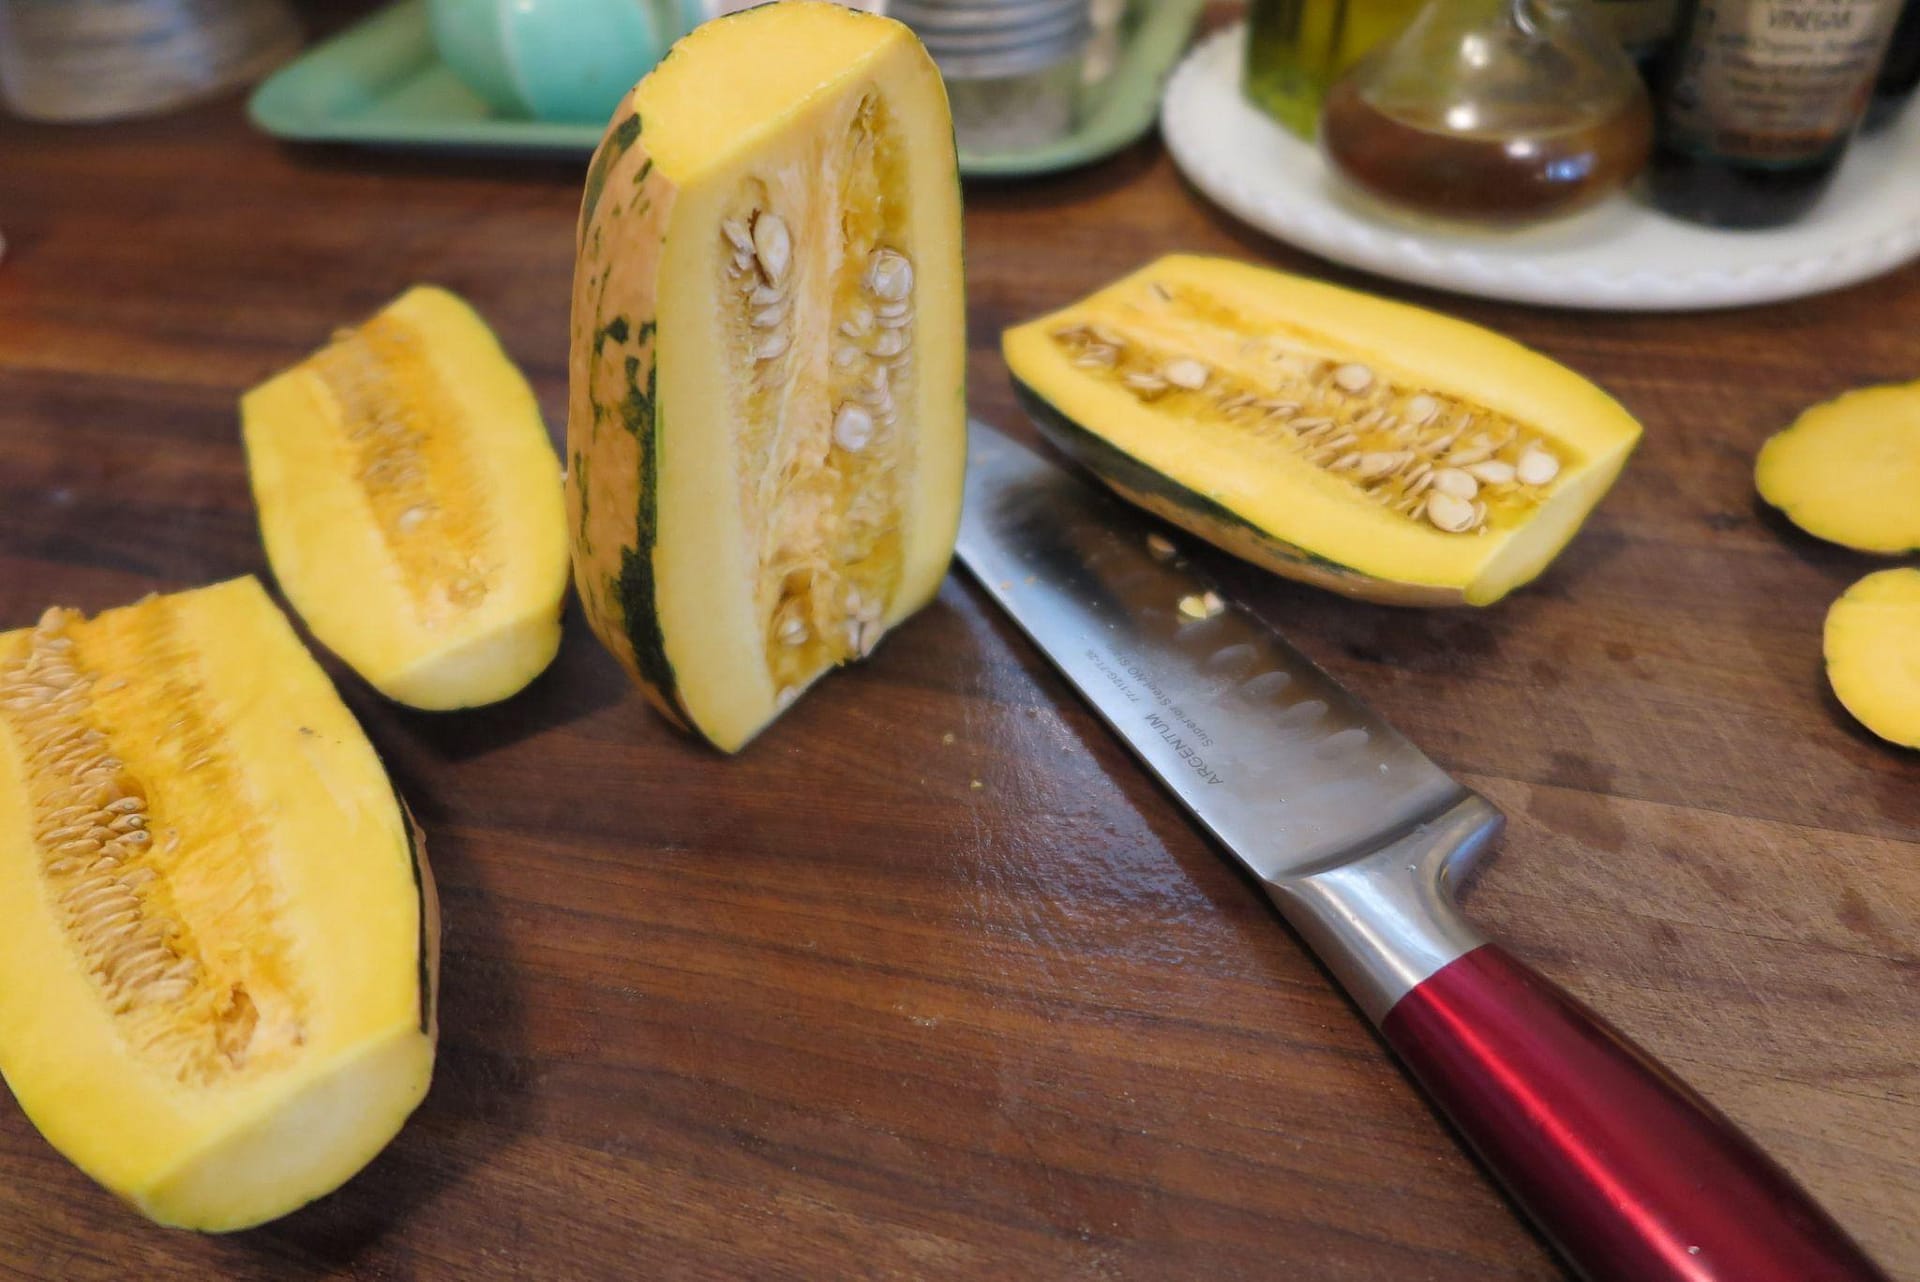 Delicata squash shown slived in half vertically on a wood cutting board